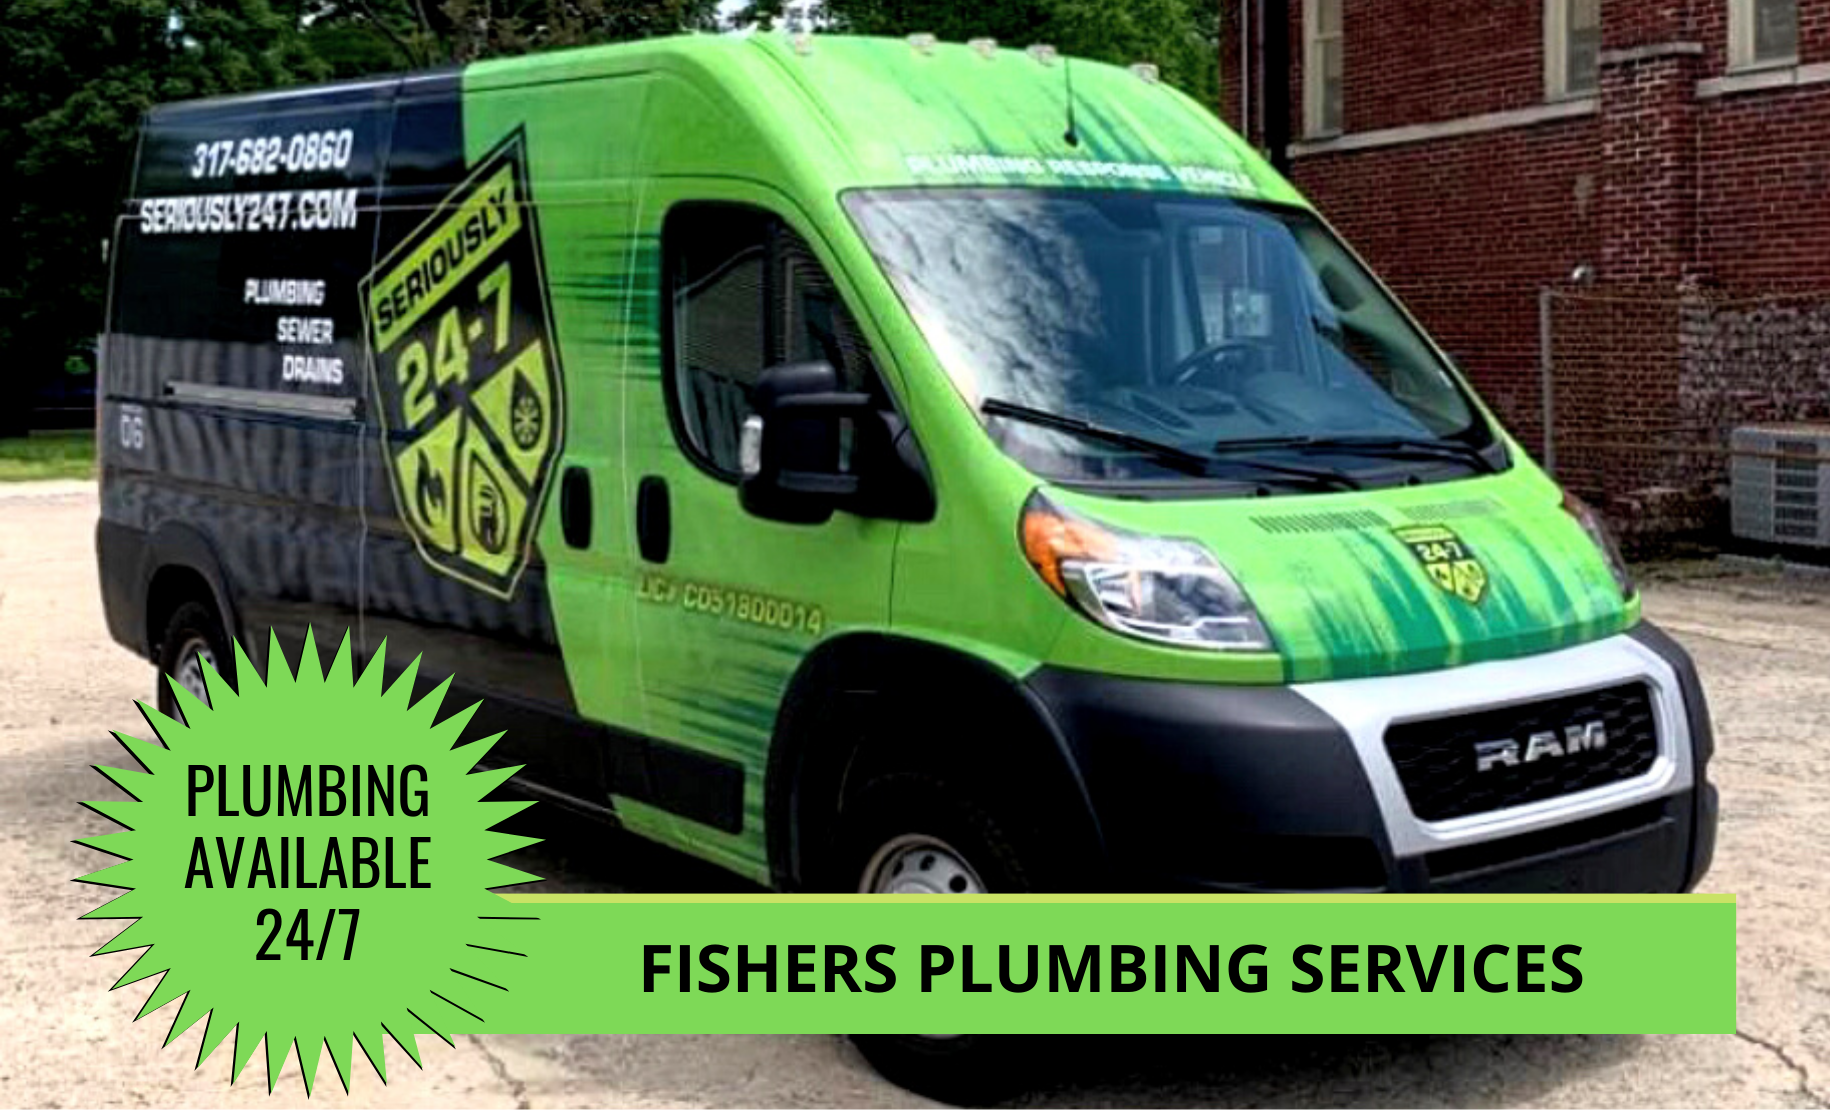 Fishers Plumbing Services